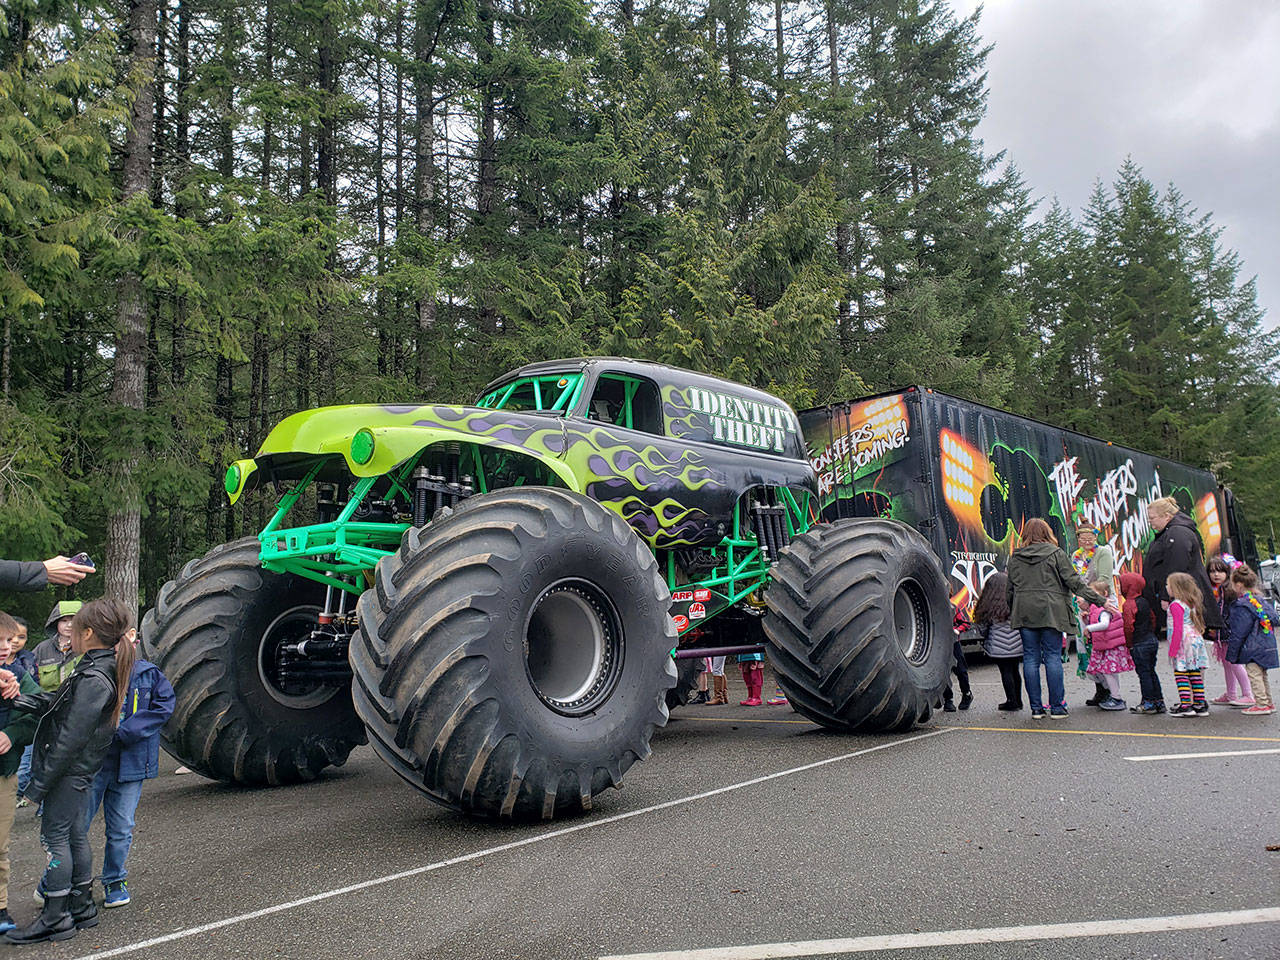 Vinland Elementary gets a visit from a monster truck